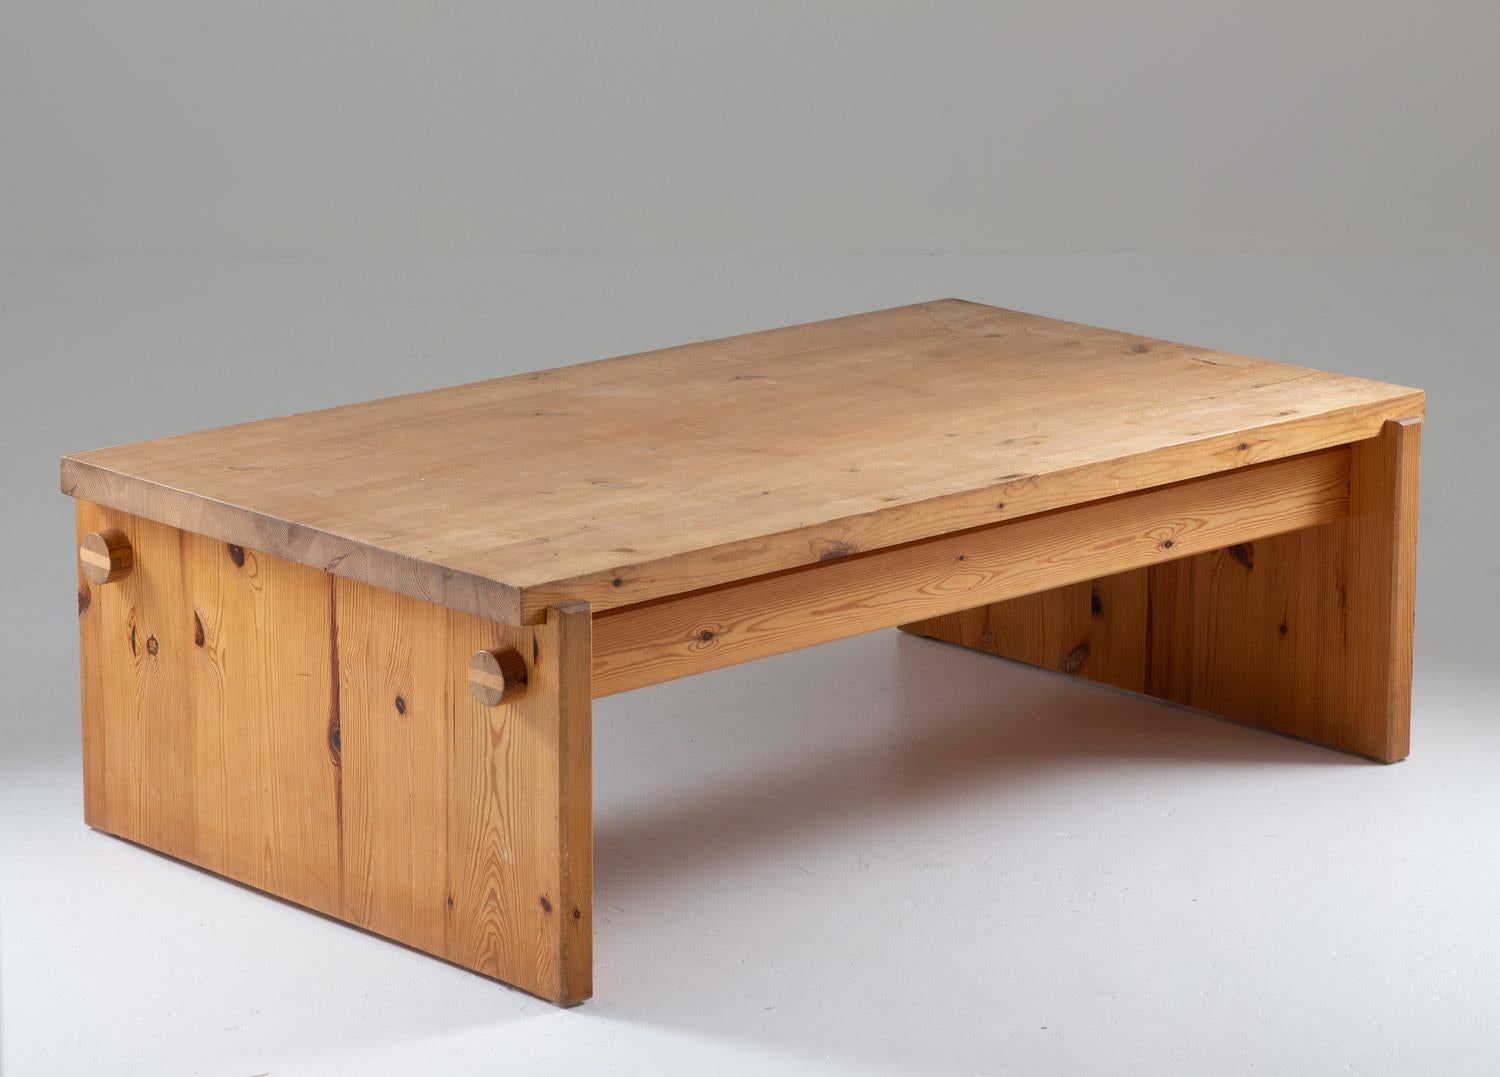 Rare coffee table in pine by Yngve Ekström for Swedese, circa 1970. 
This table is a great example of the robust pine furniture era that grew popular in Sweden in the late 1960s. The table is made of thick solid Pine and this example has a perfect